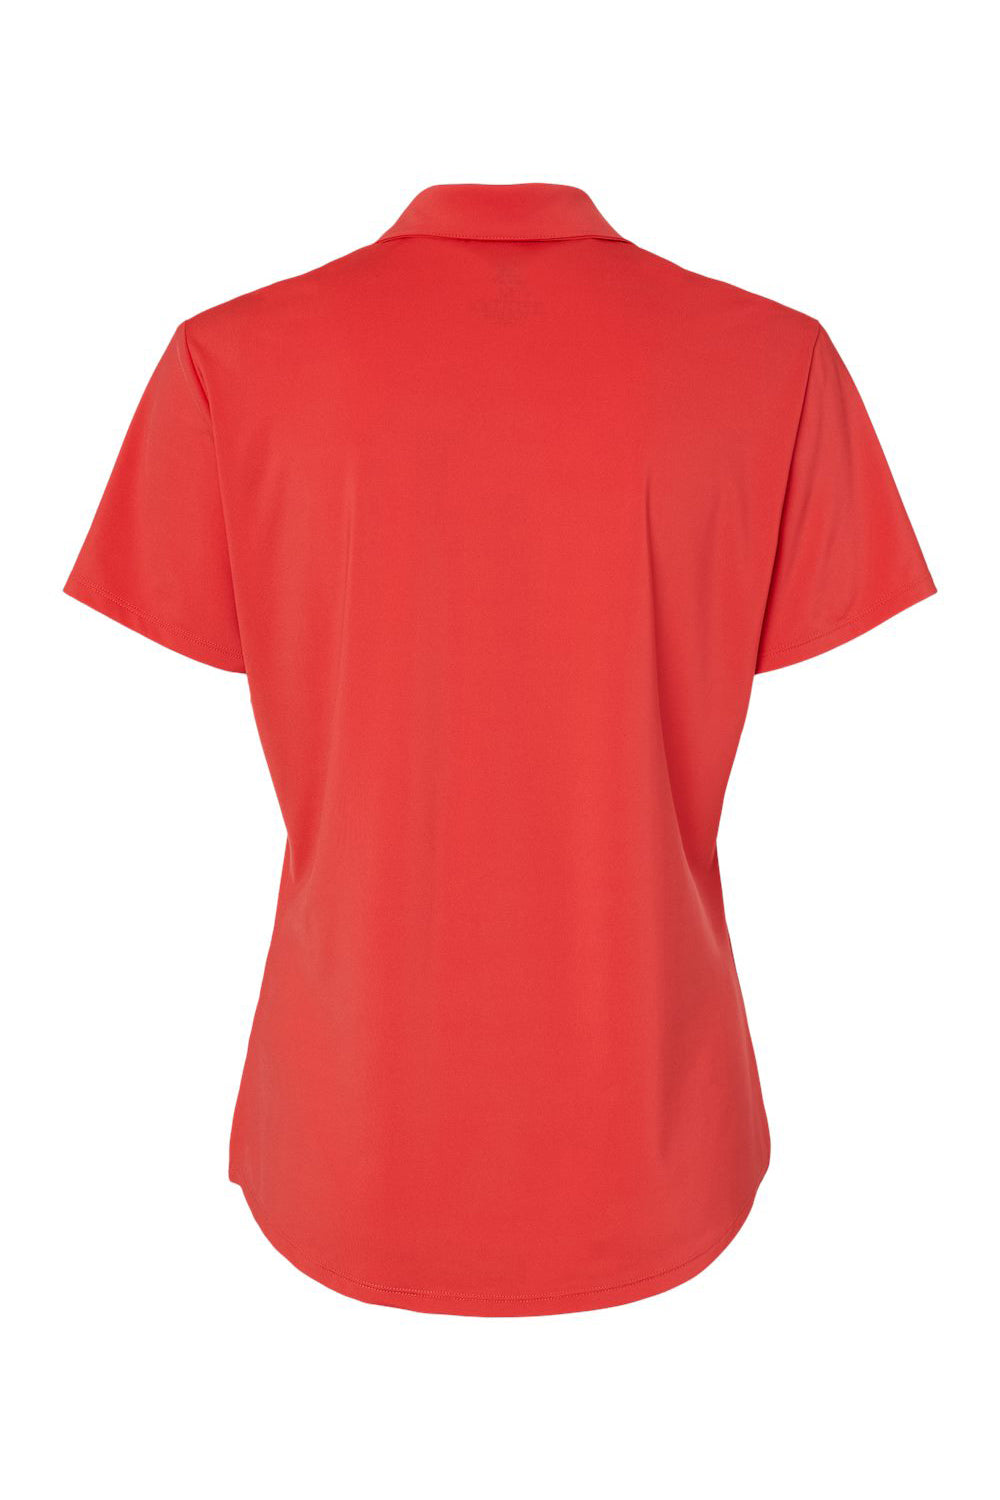 Adidas A515 Womens Ultimate Moisture Wicking Short Sleeve Polo Shirt Real Coral Flat Back